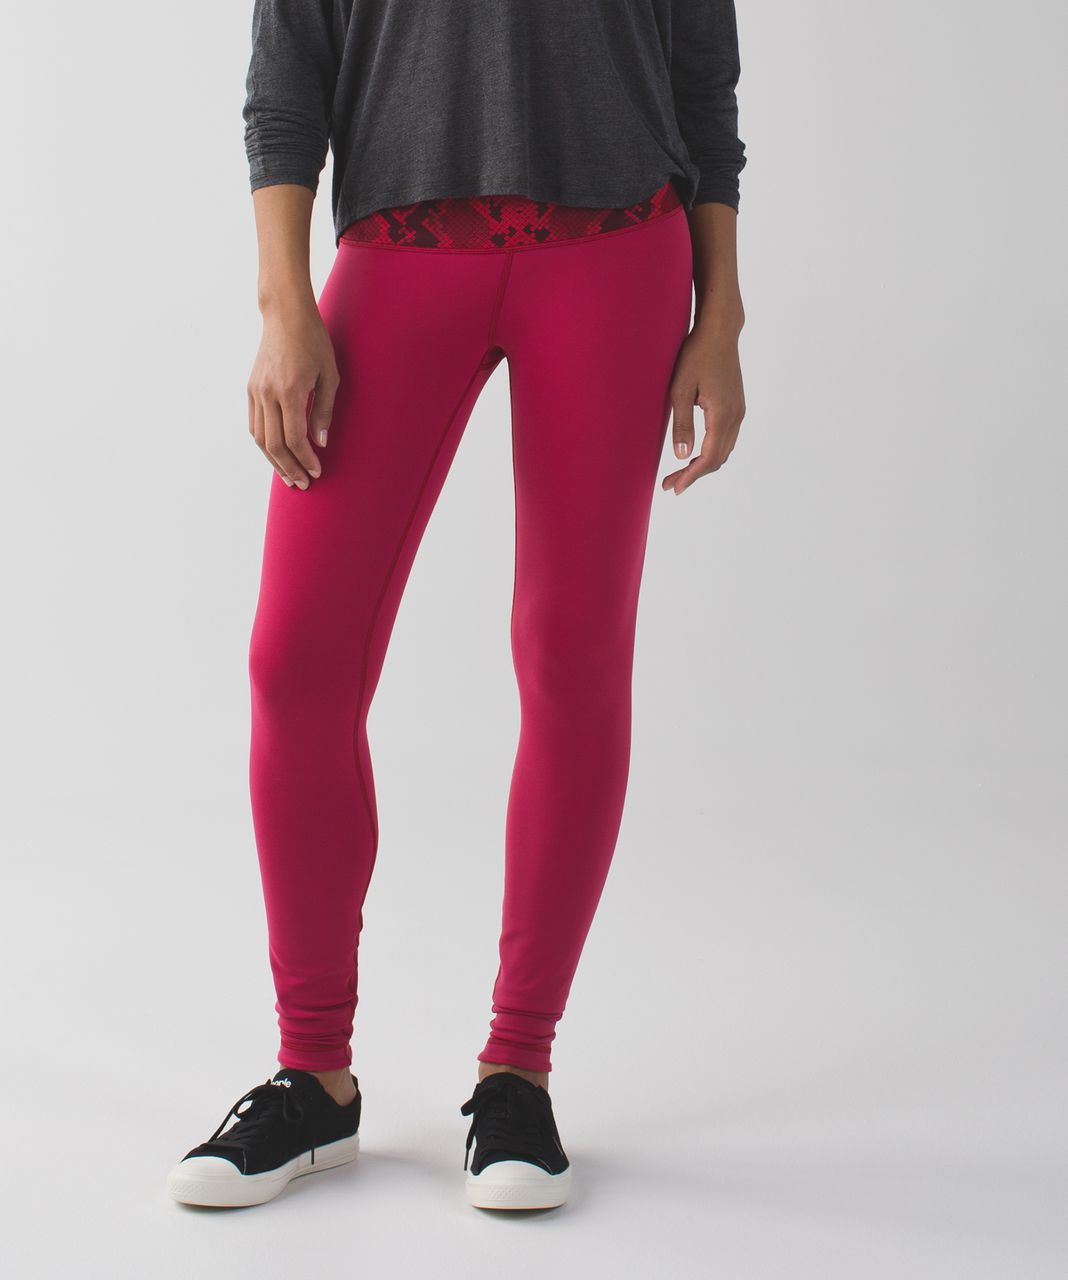 Lululemon and Ivivva leggings and track-pants worn once, Women's - Bottoms, Red Deer